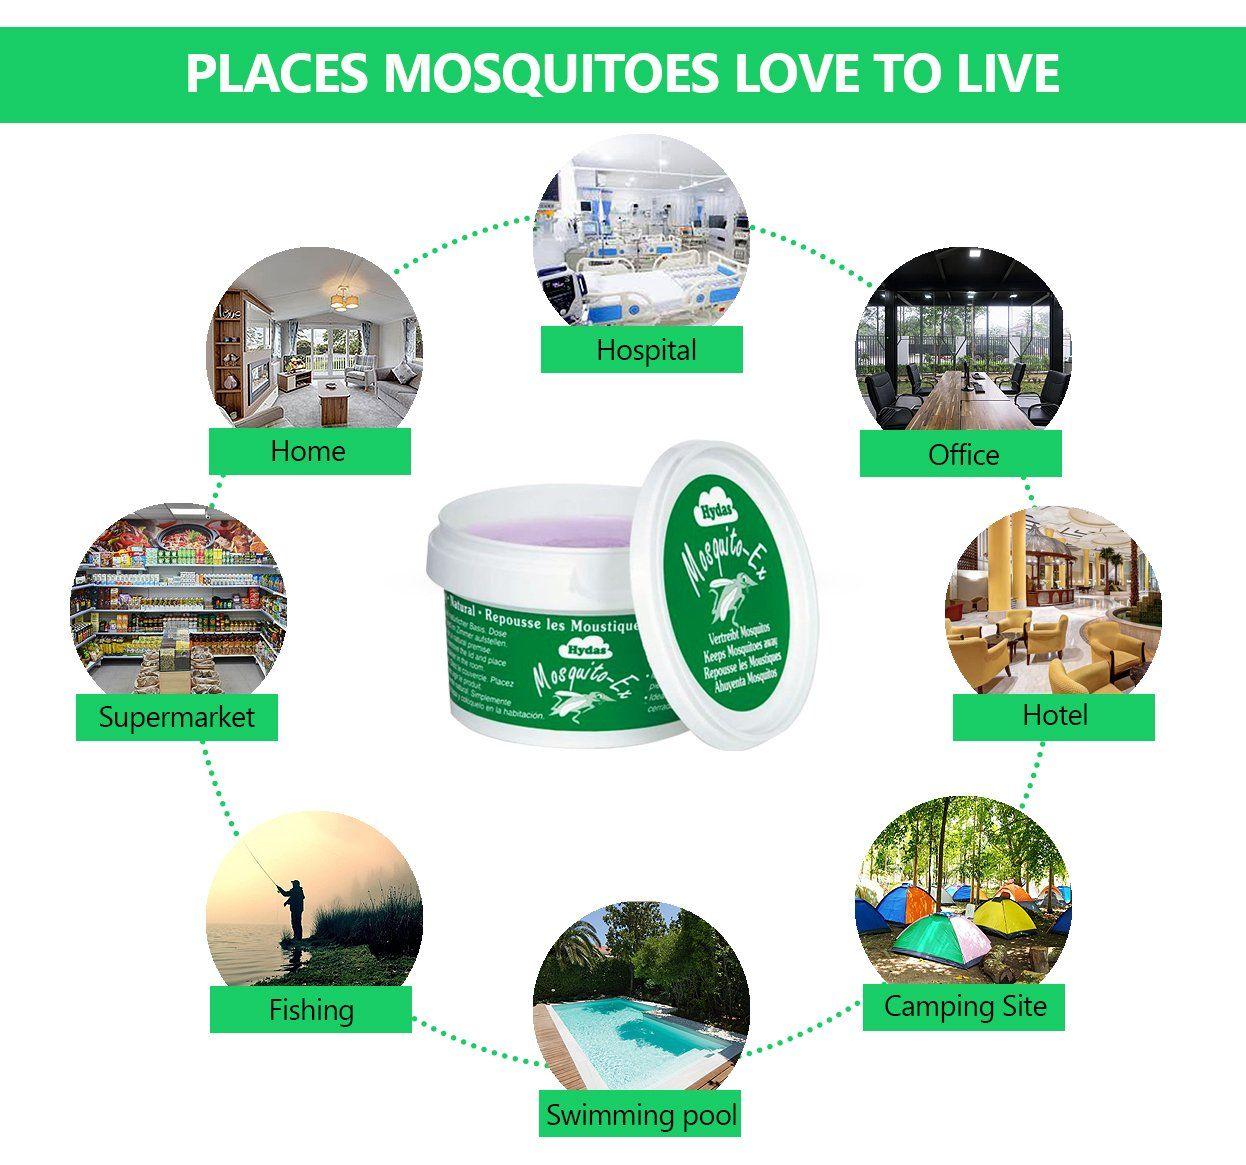 Circle of Friends H.Y.d.a.s. Logo - Amazon.com : Verseo Mosquito Ex. Deet Free Natural Insect Repellent